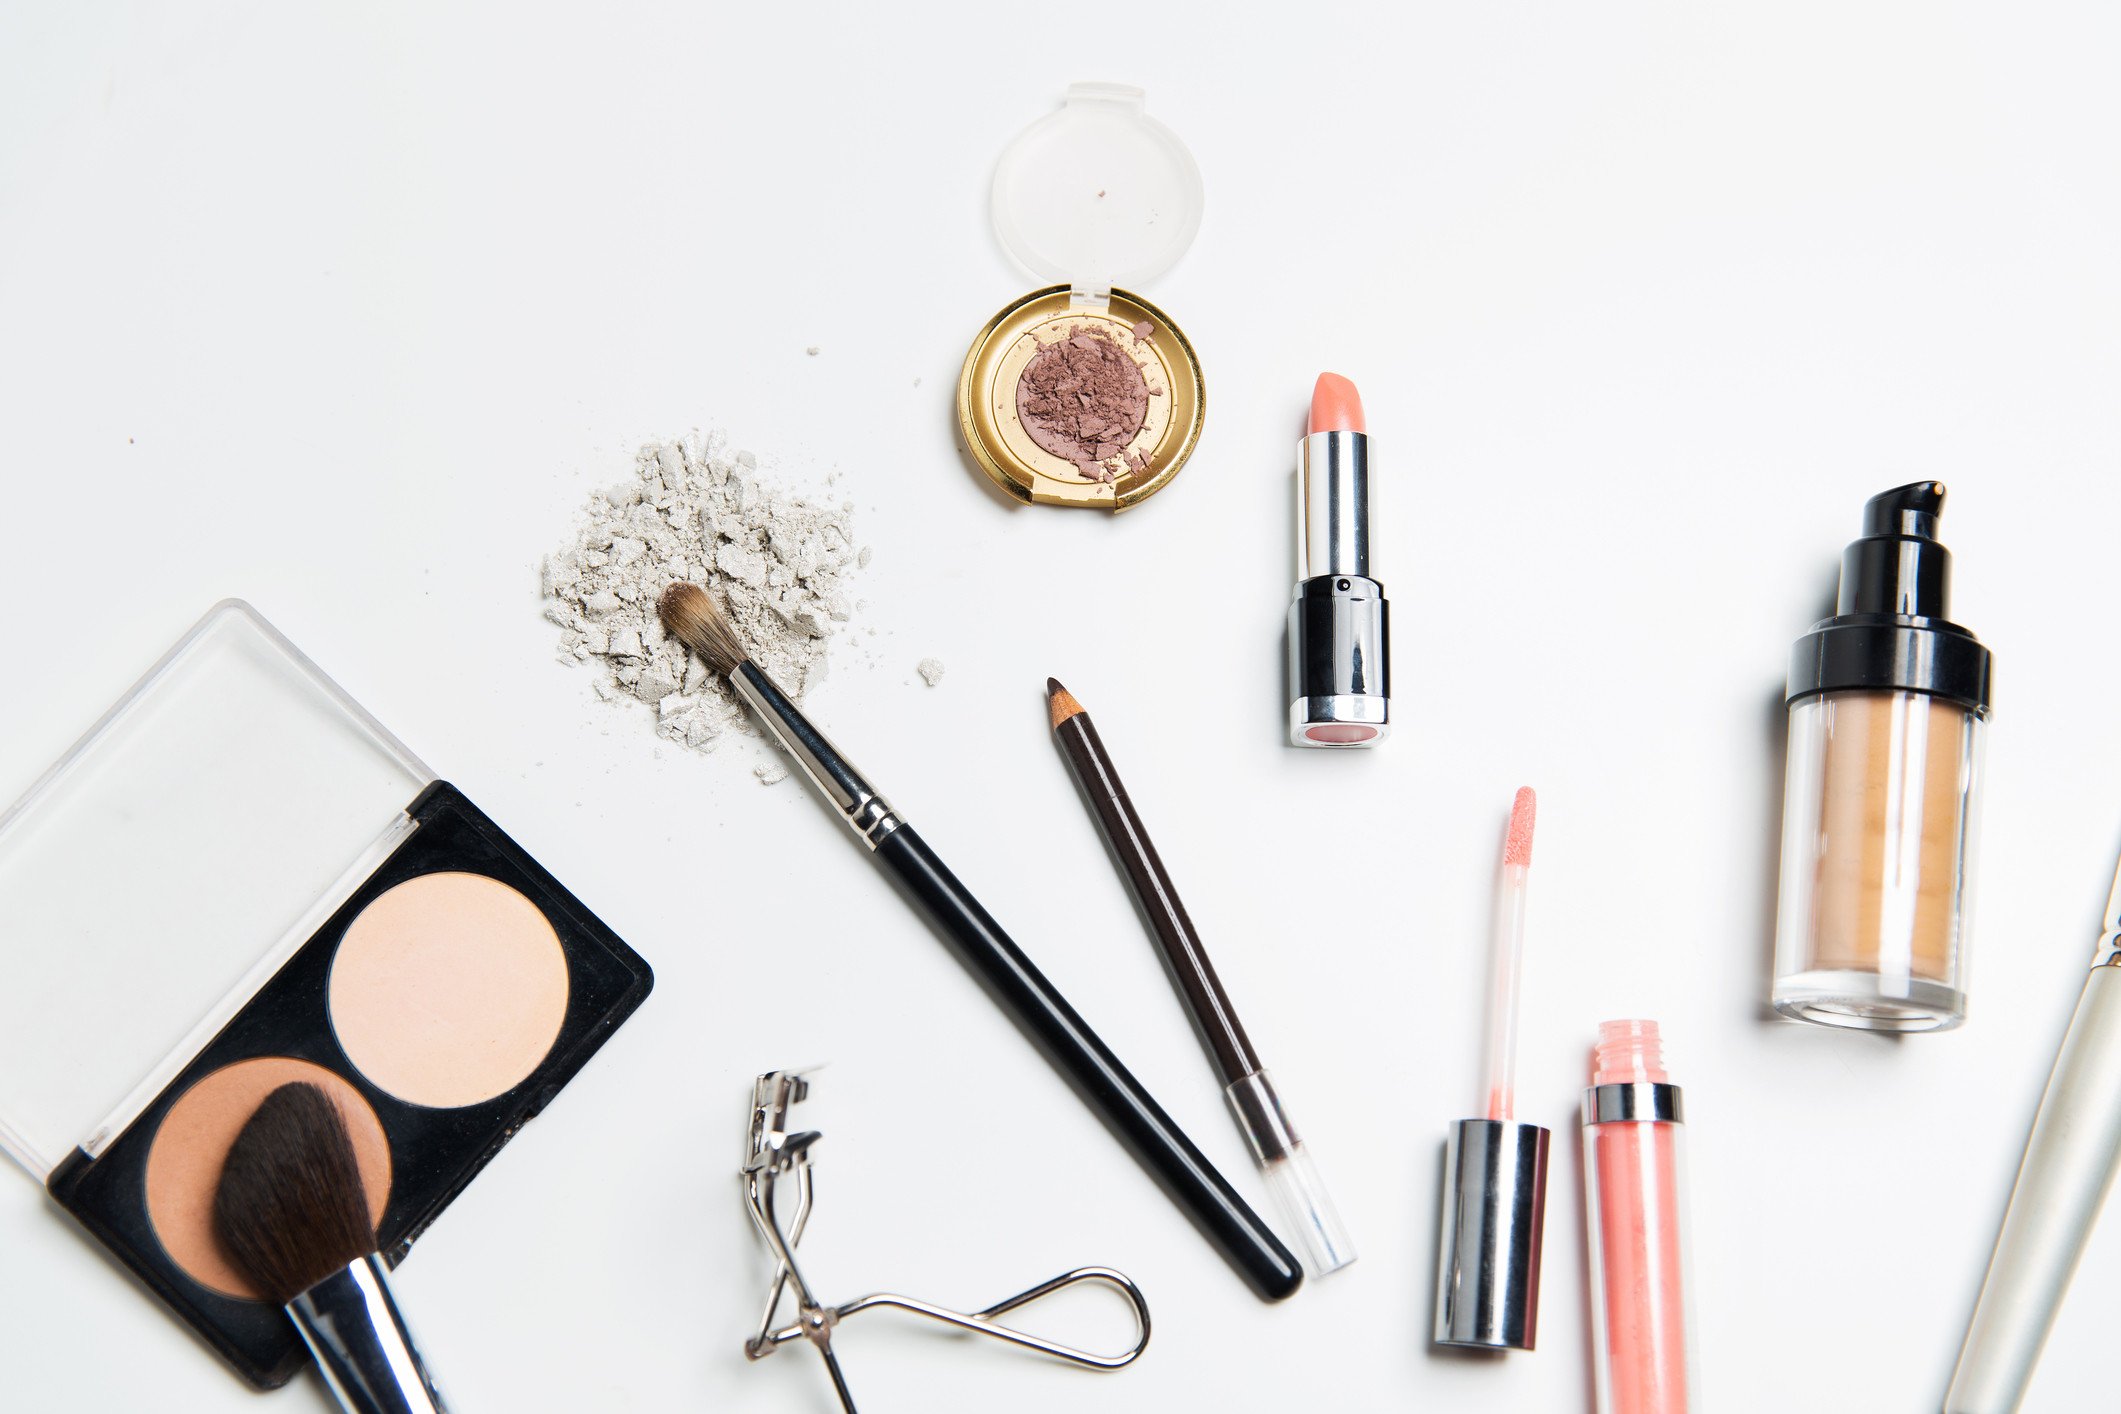 An Image of various make-up products on a white background.